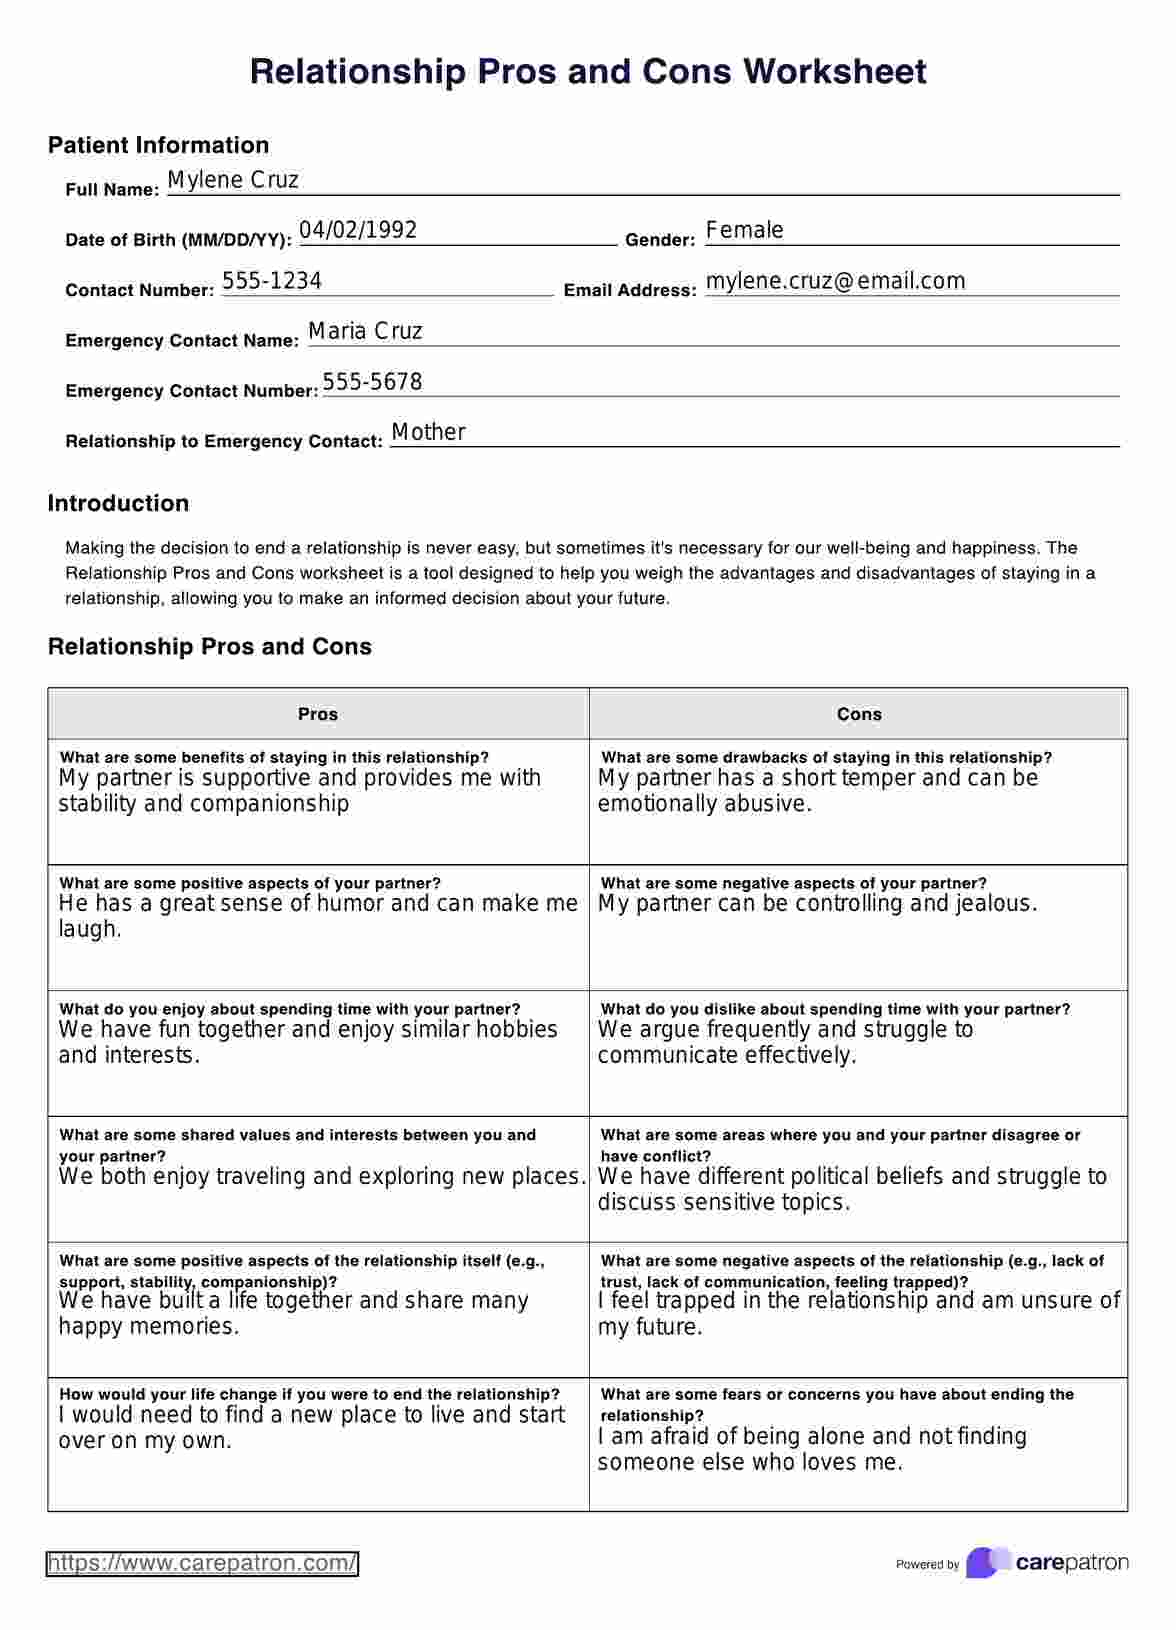 Relationship Pros and Cons Worksheet PDF Example